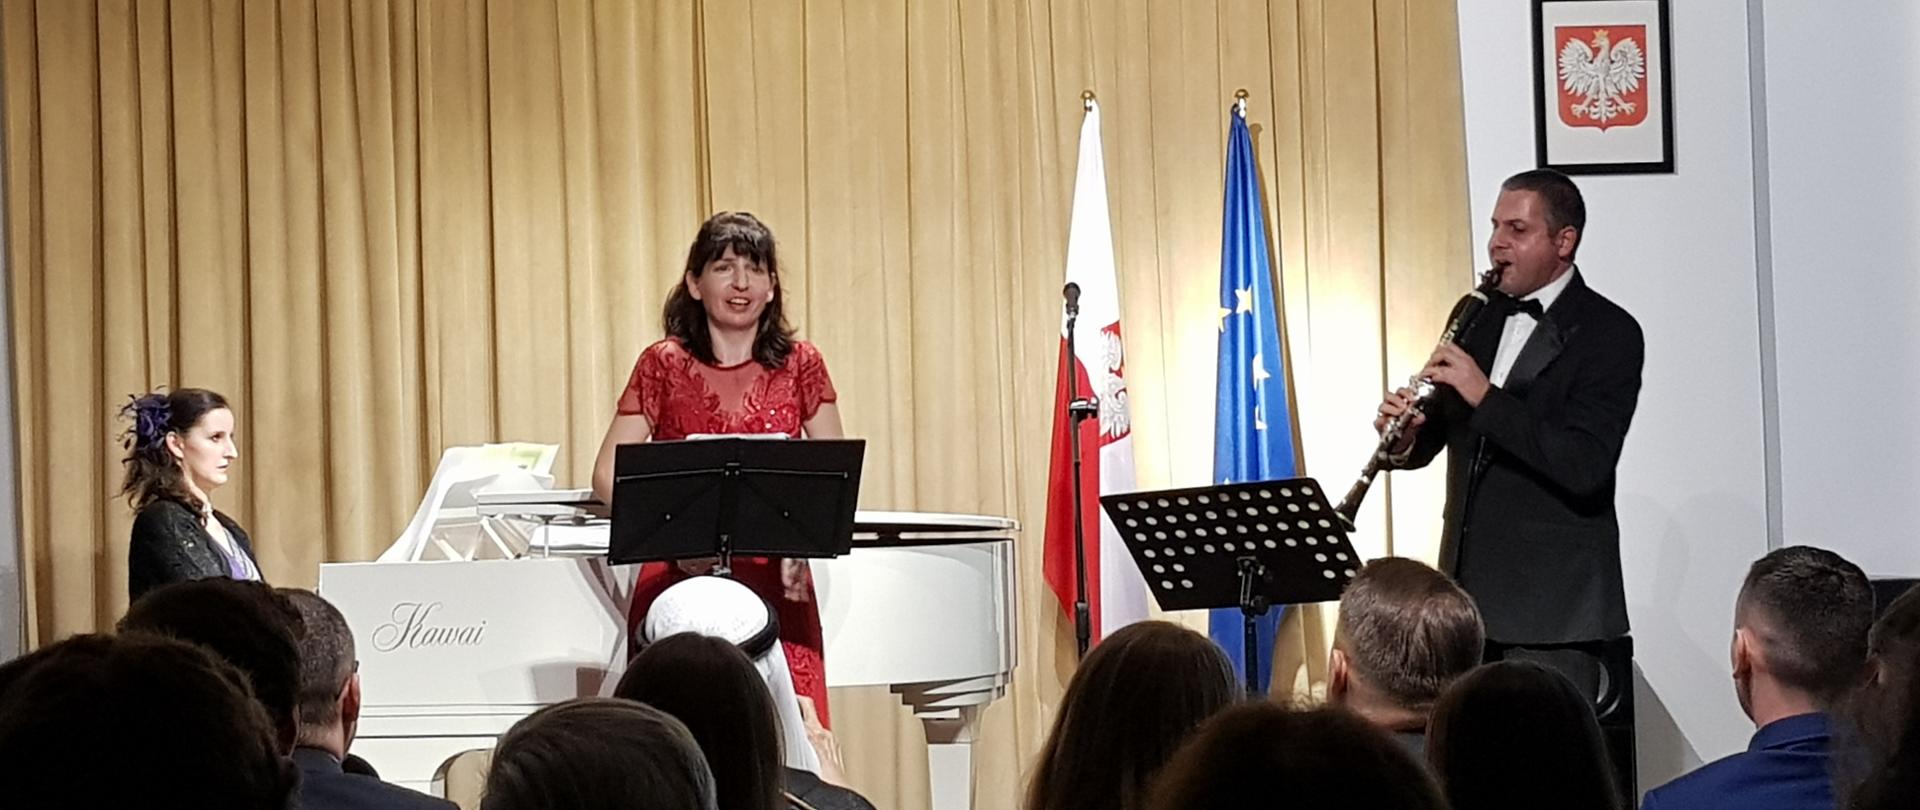 National Independence Day at the Embassy of the Republic of Poland
